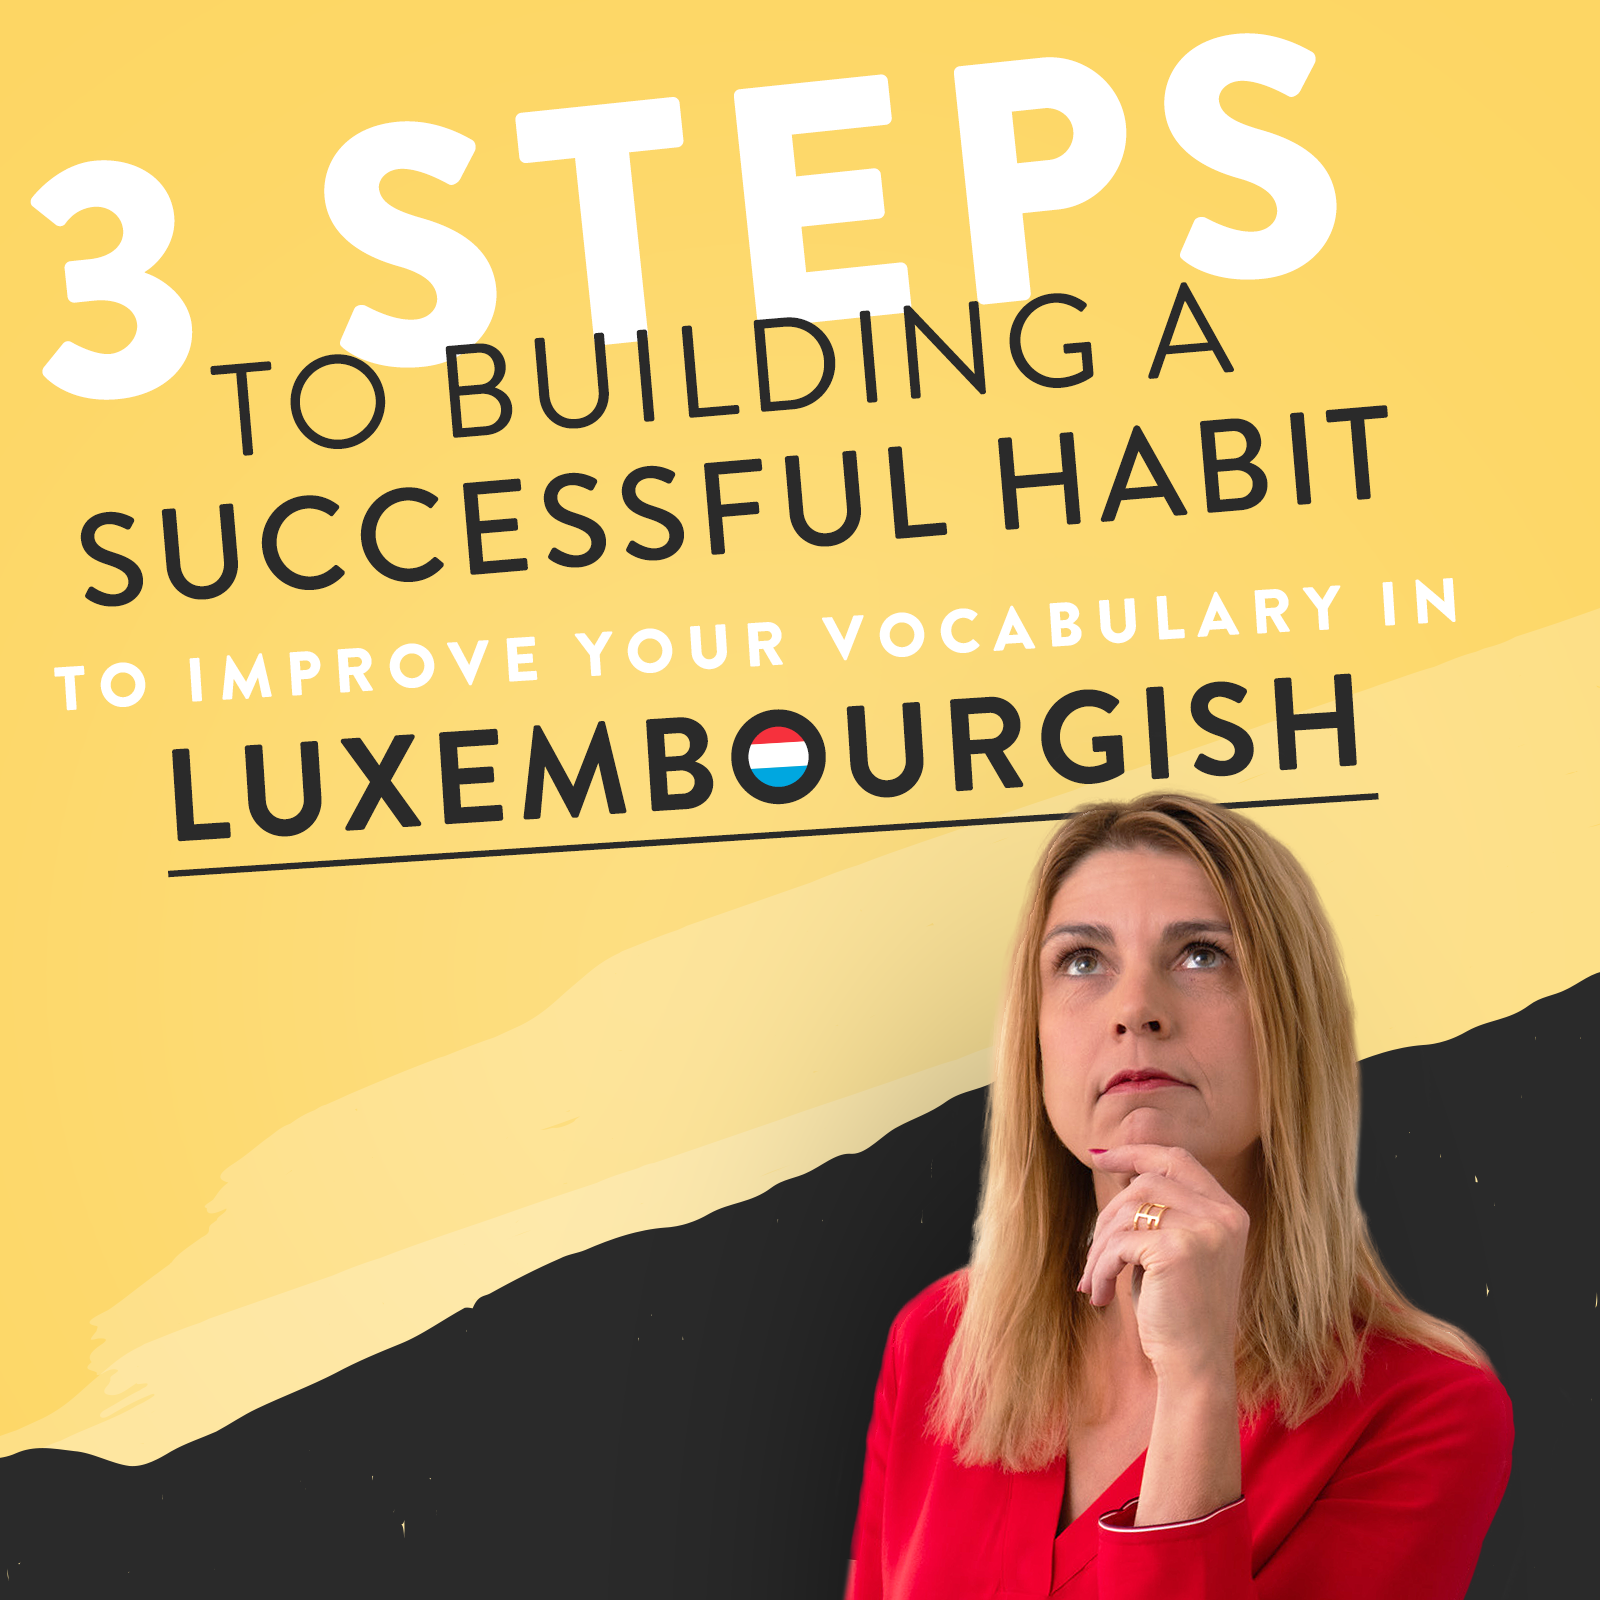 Habits learn Luxembourgish